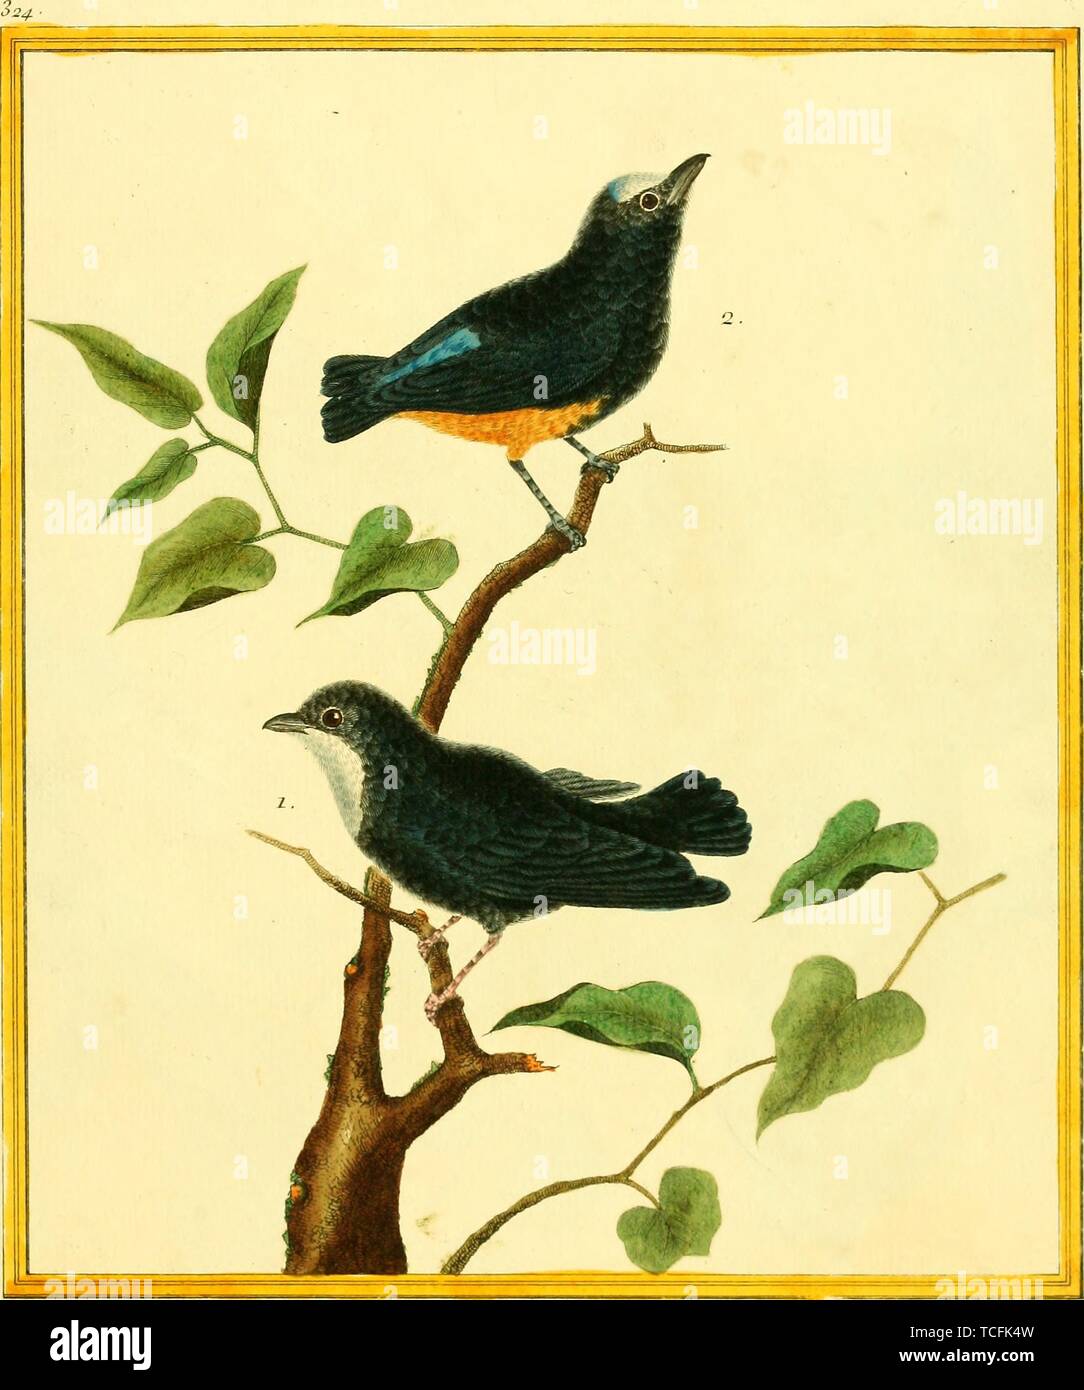 Engraved drawing of the Manakins, White-throated Manakin (Corapipo gutturalis) and White-fronted Manakin (Lepidothrix serena), from the book 'Planches enluminees Dhistoire naturelle' by Francois Nicolas, Louis Jean Marie Daubenton, and Edme-Louis Daubenton, 1765. Courtesy Internet Archive. () Stock Photo